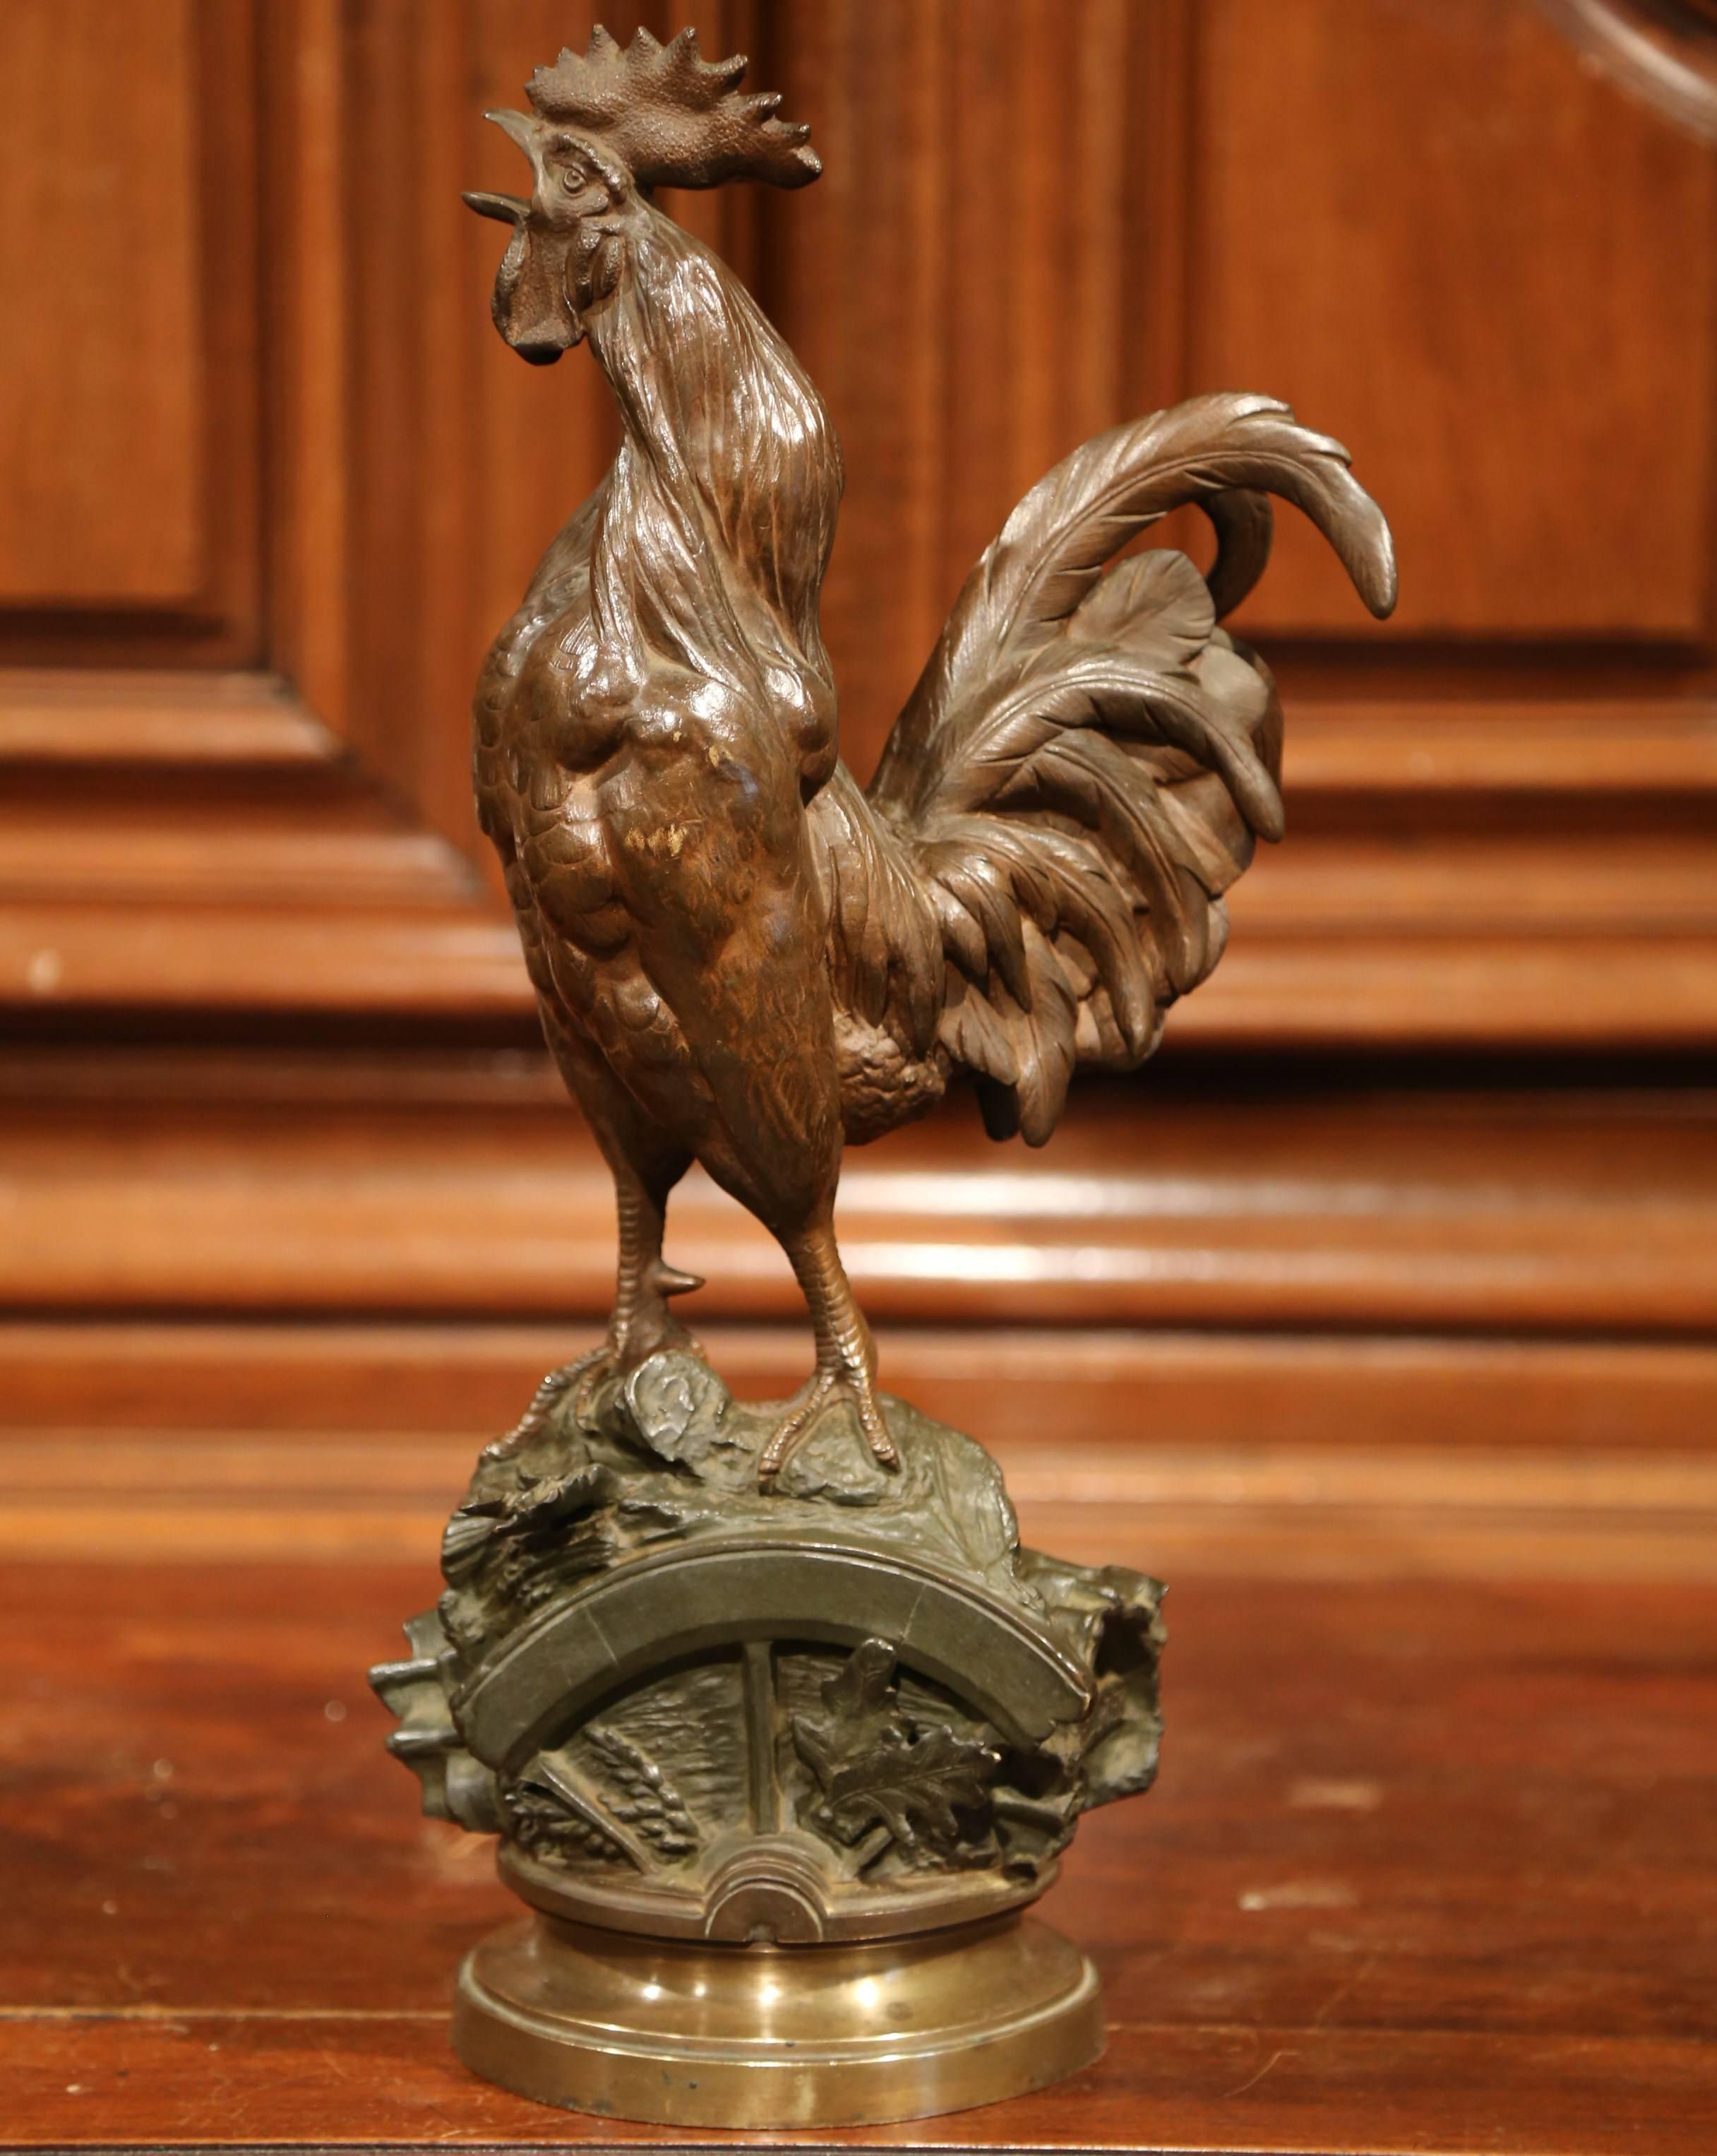 19th Century, French Patinated Bronze Rooster Sculpture Signed P. Lecourtier 1